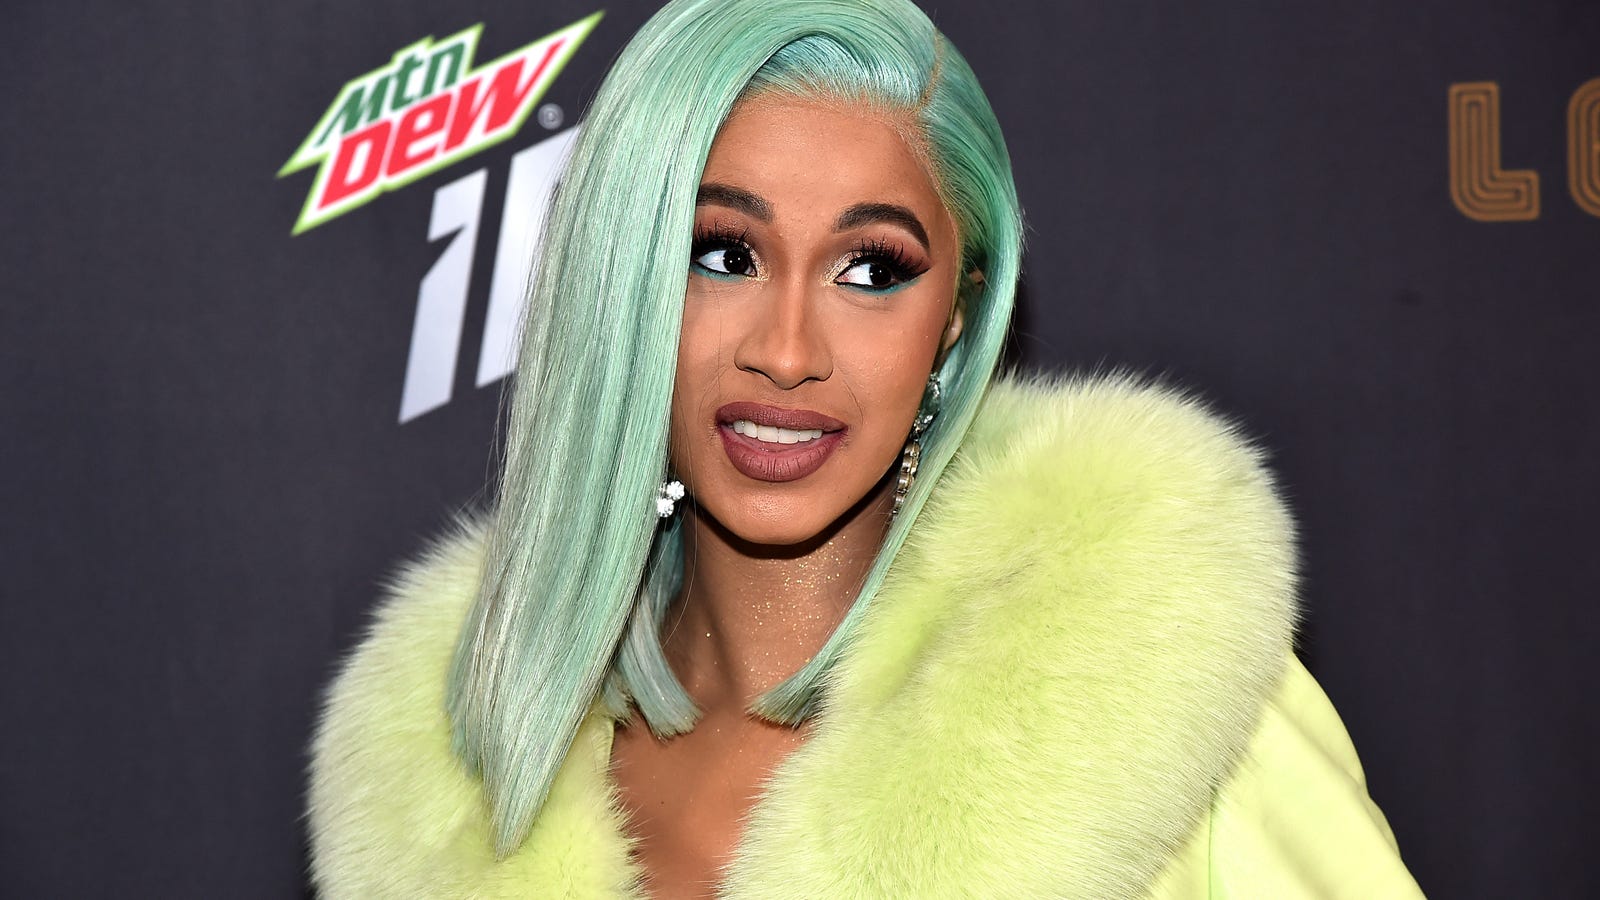 Cardi B Turns Herself in to Police After Queens Strip Club Brawl